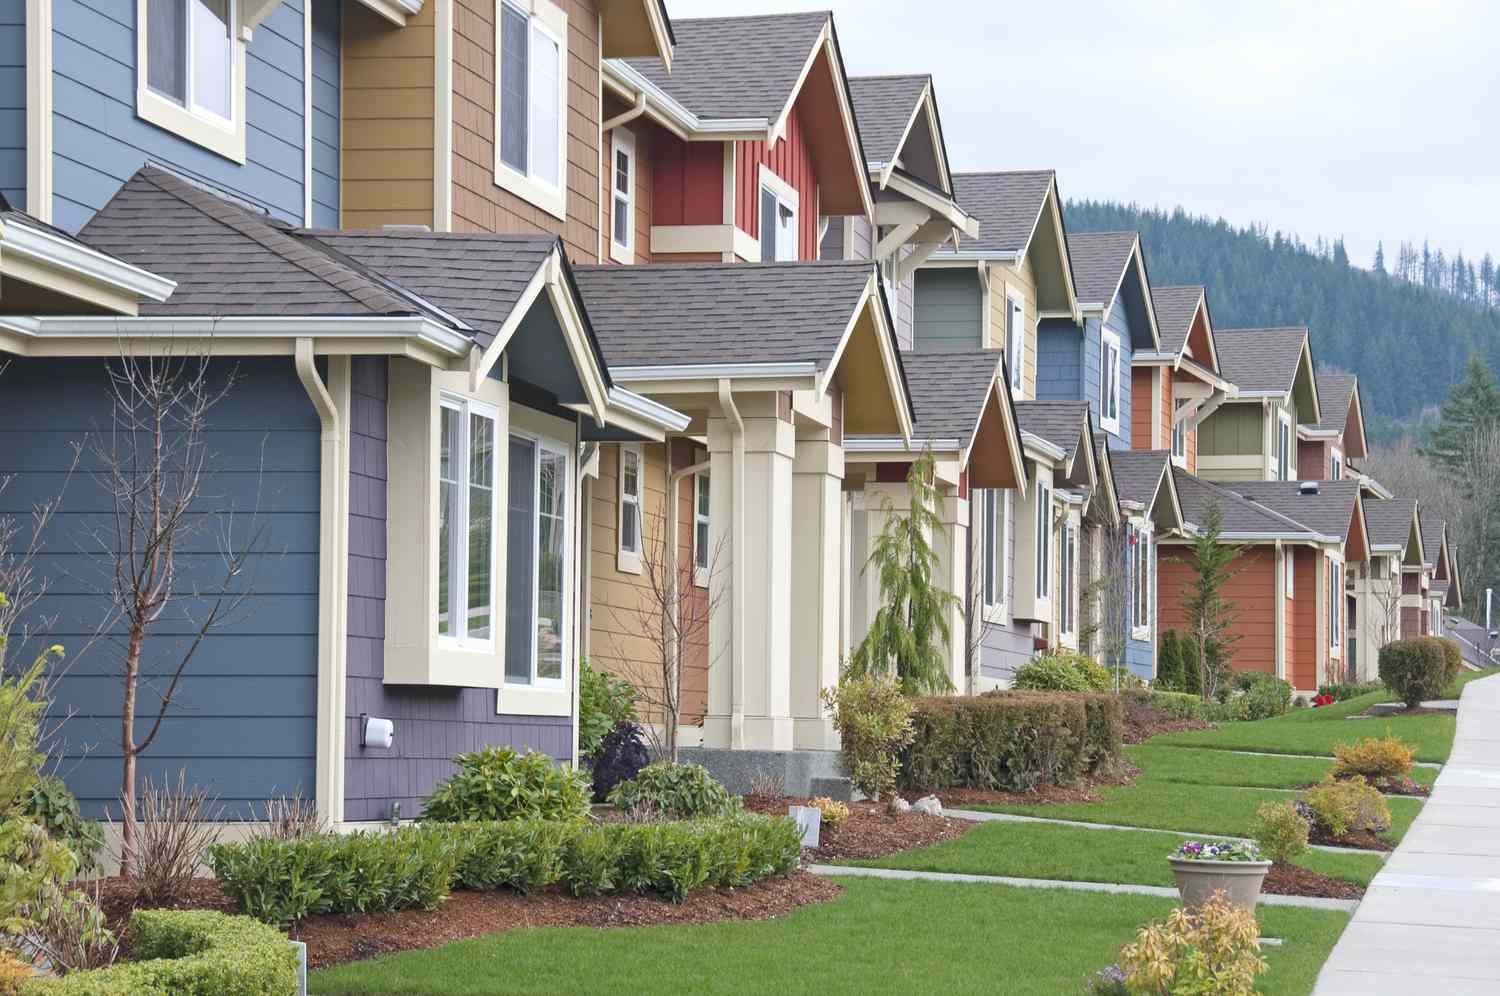 Different colored houses with manicured lawns